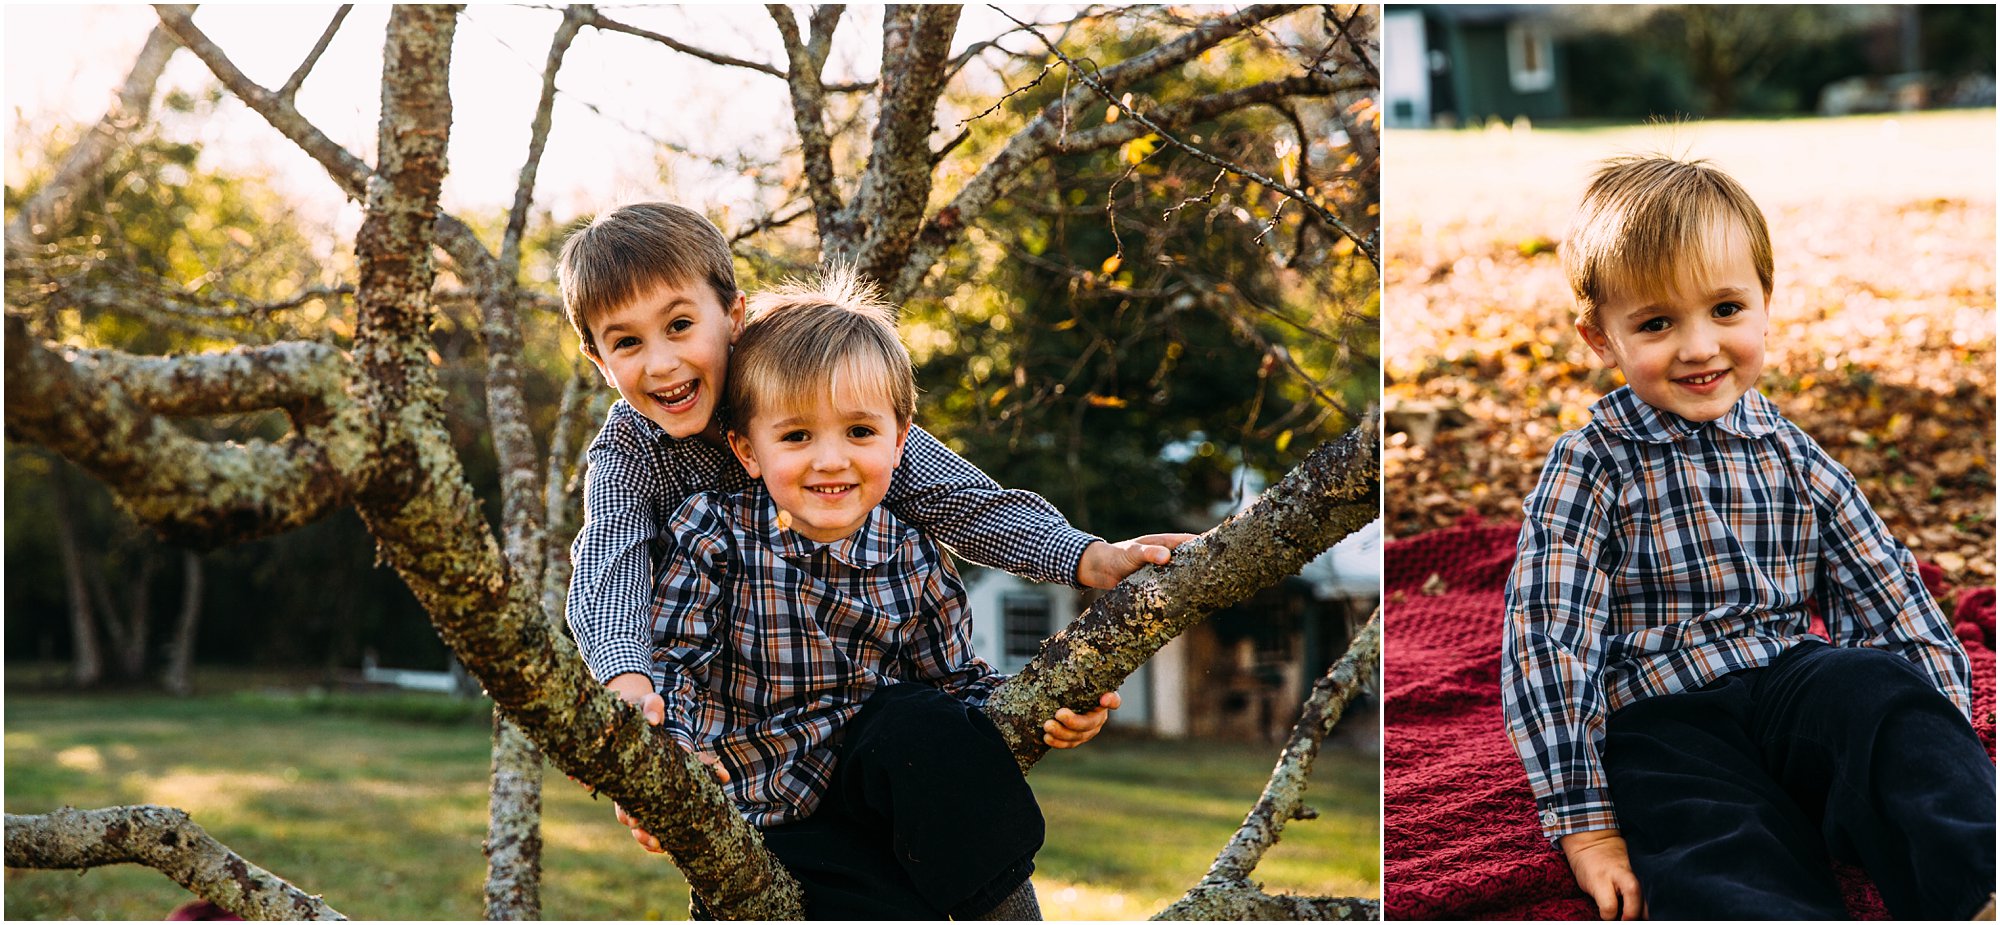 Young brothers climbing trees in Chattanooga park